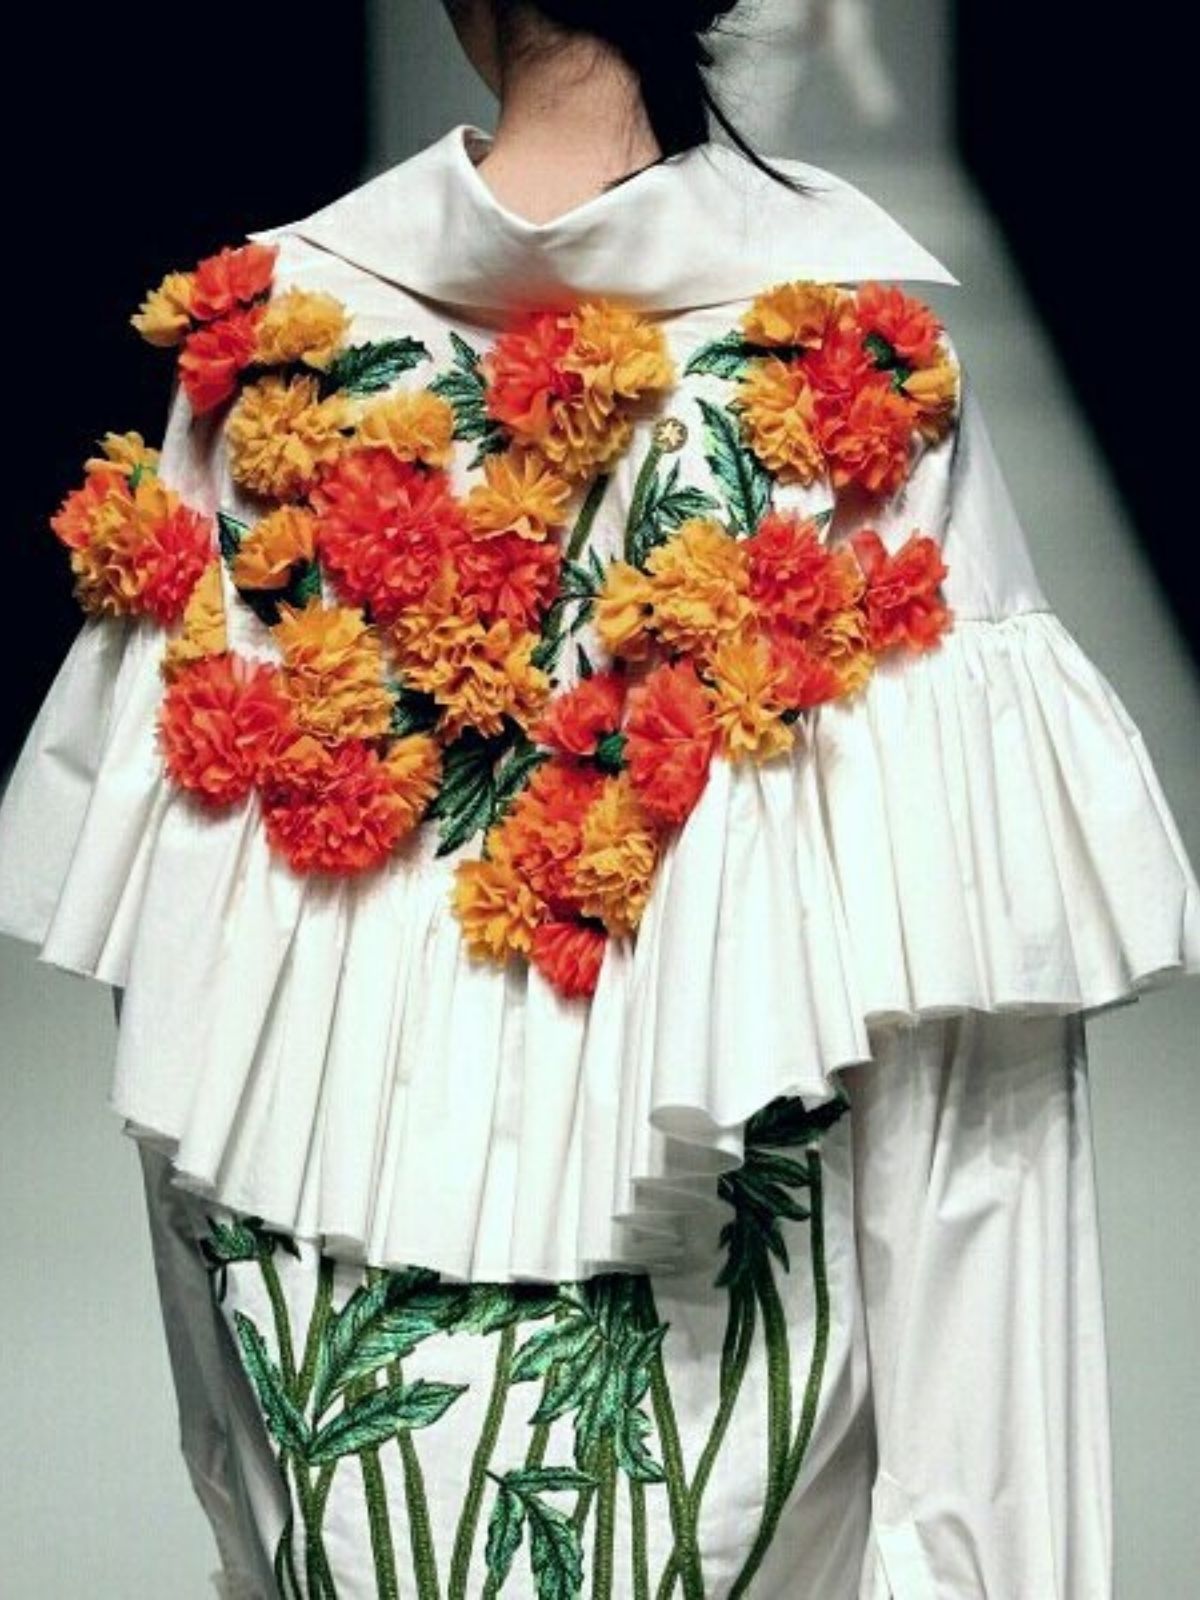 marigolds embroided on white dress - flowers on couture - nguyen cong tri on thursd